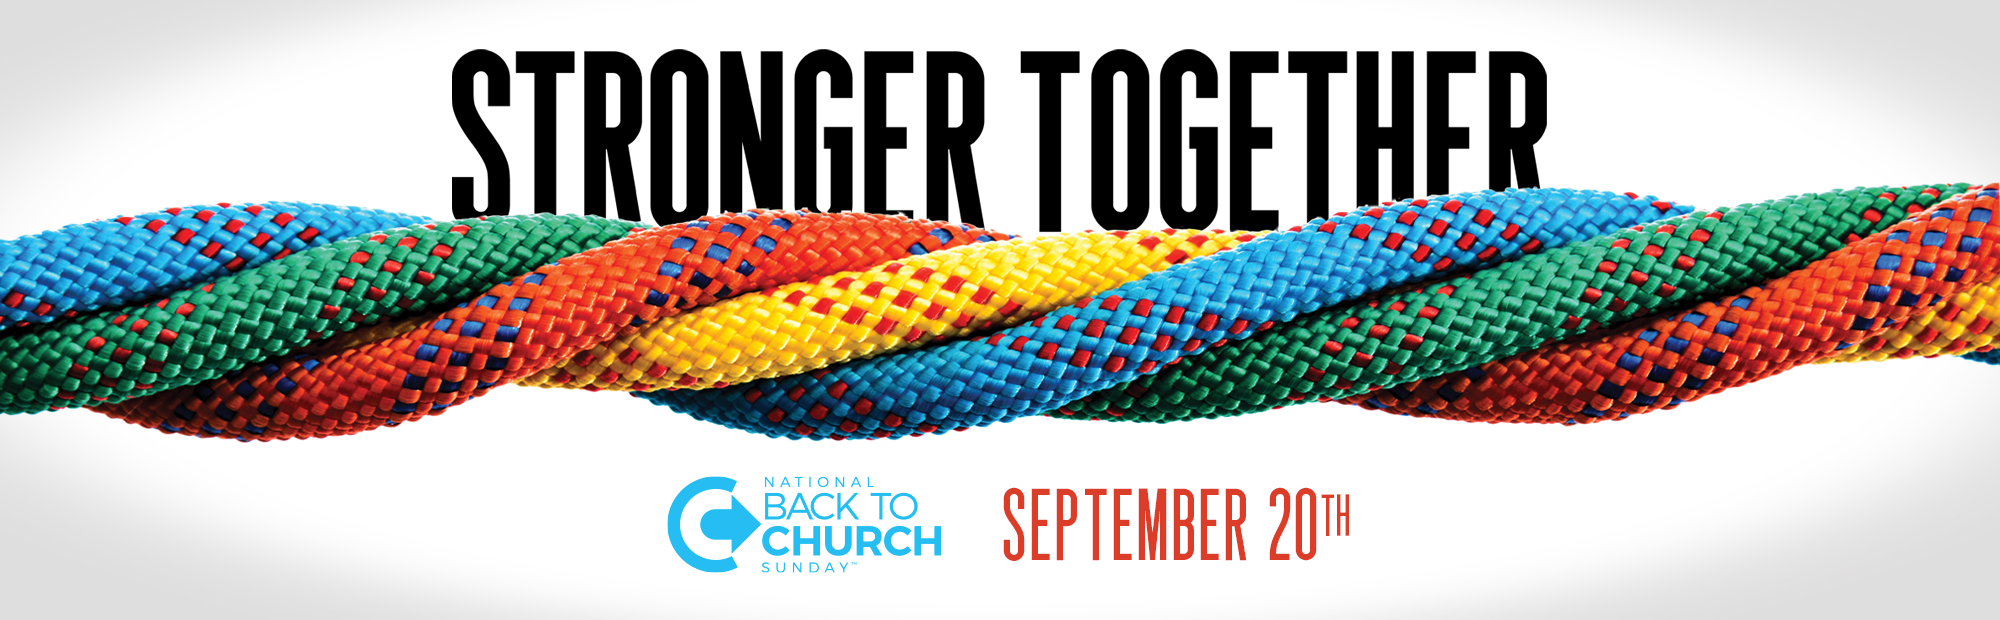 Back To Church Sunday 2020 Together